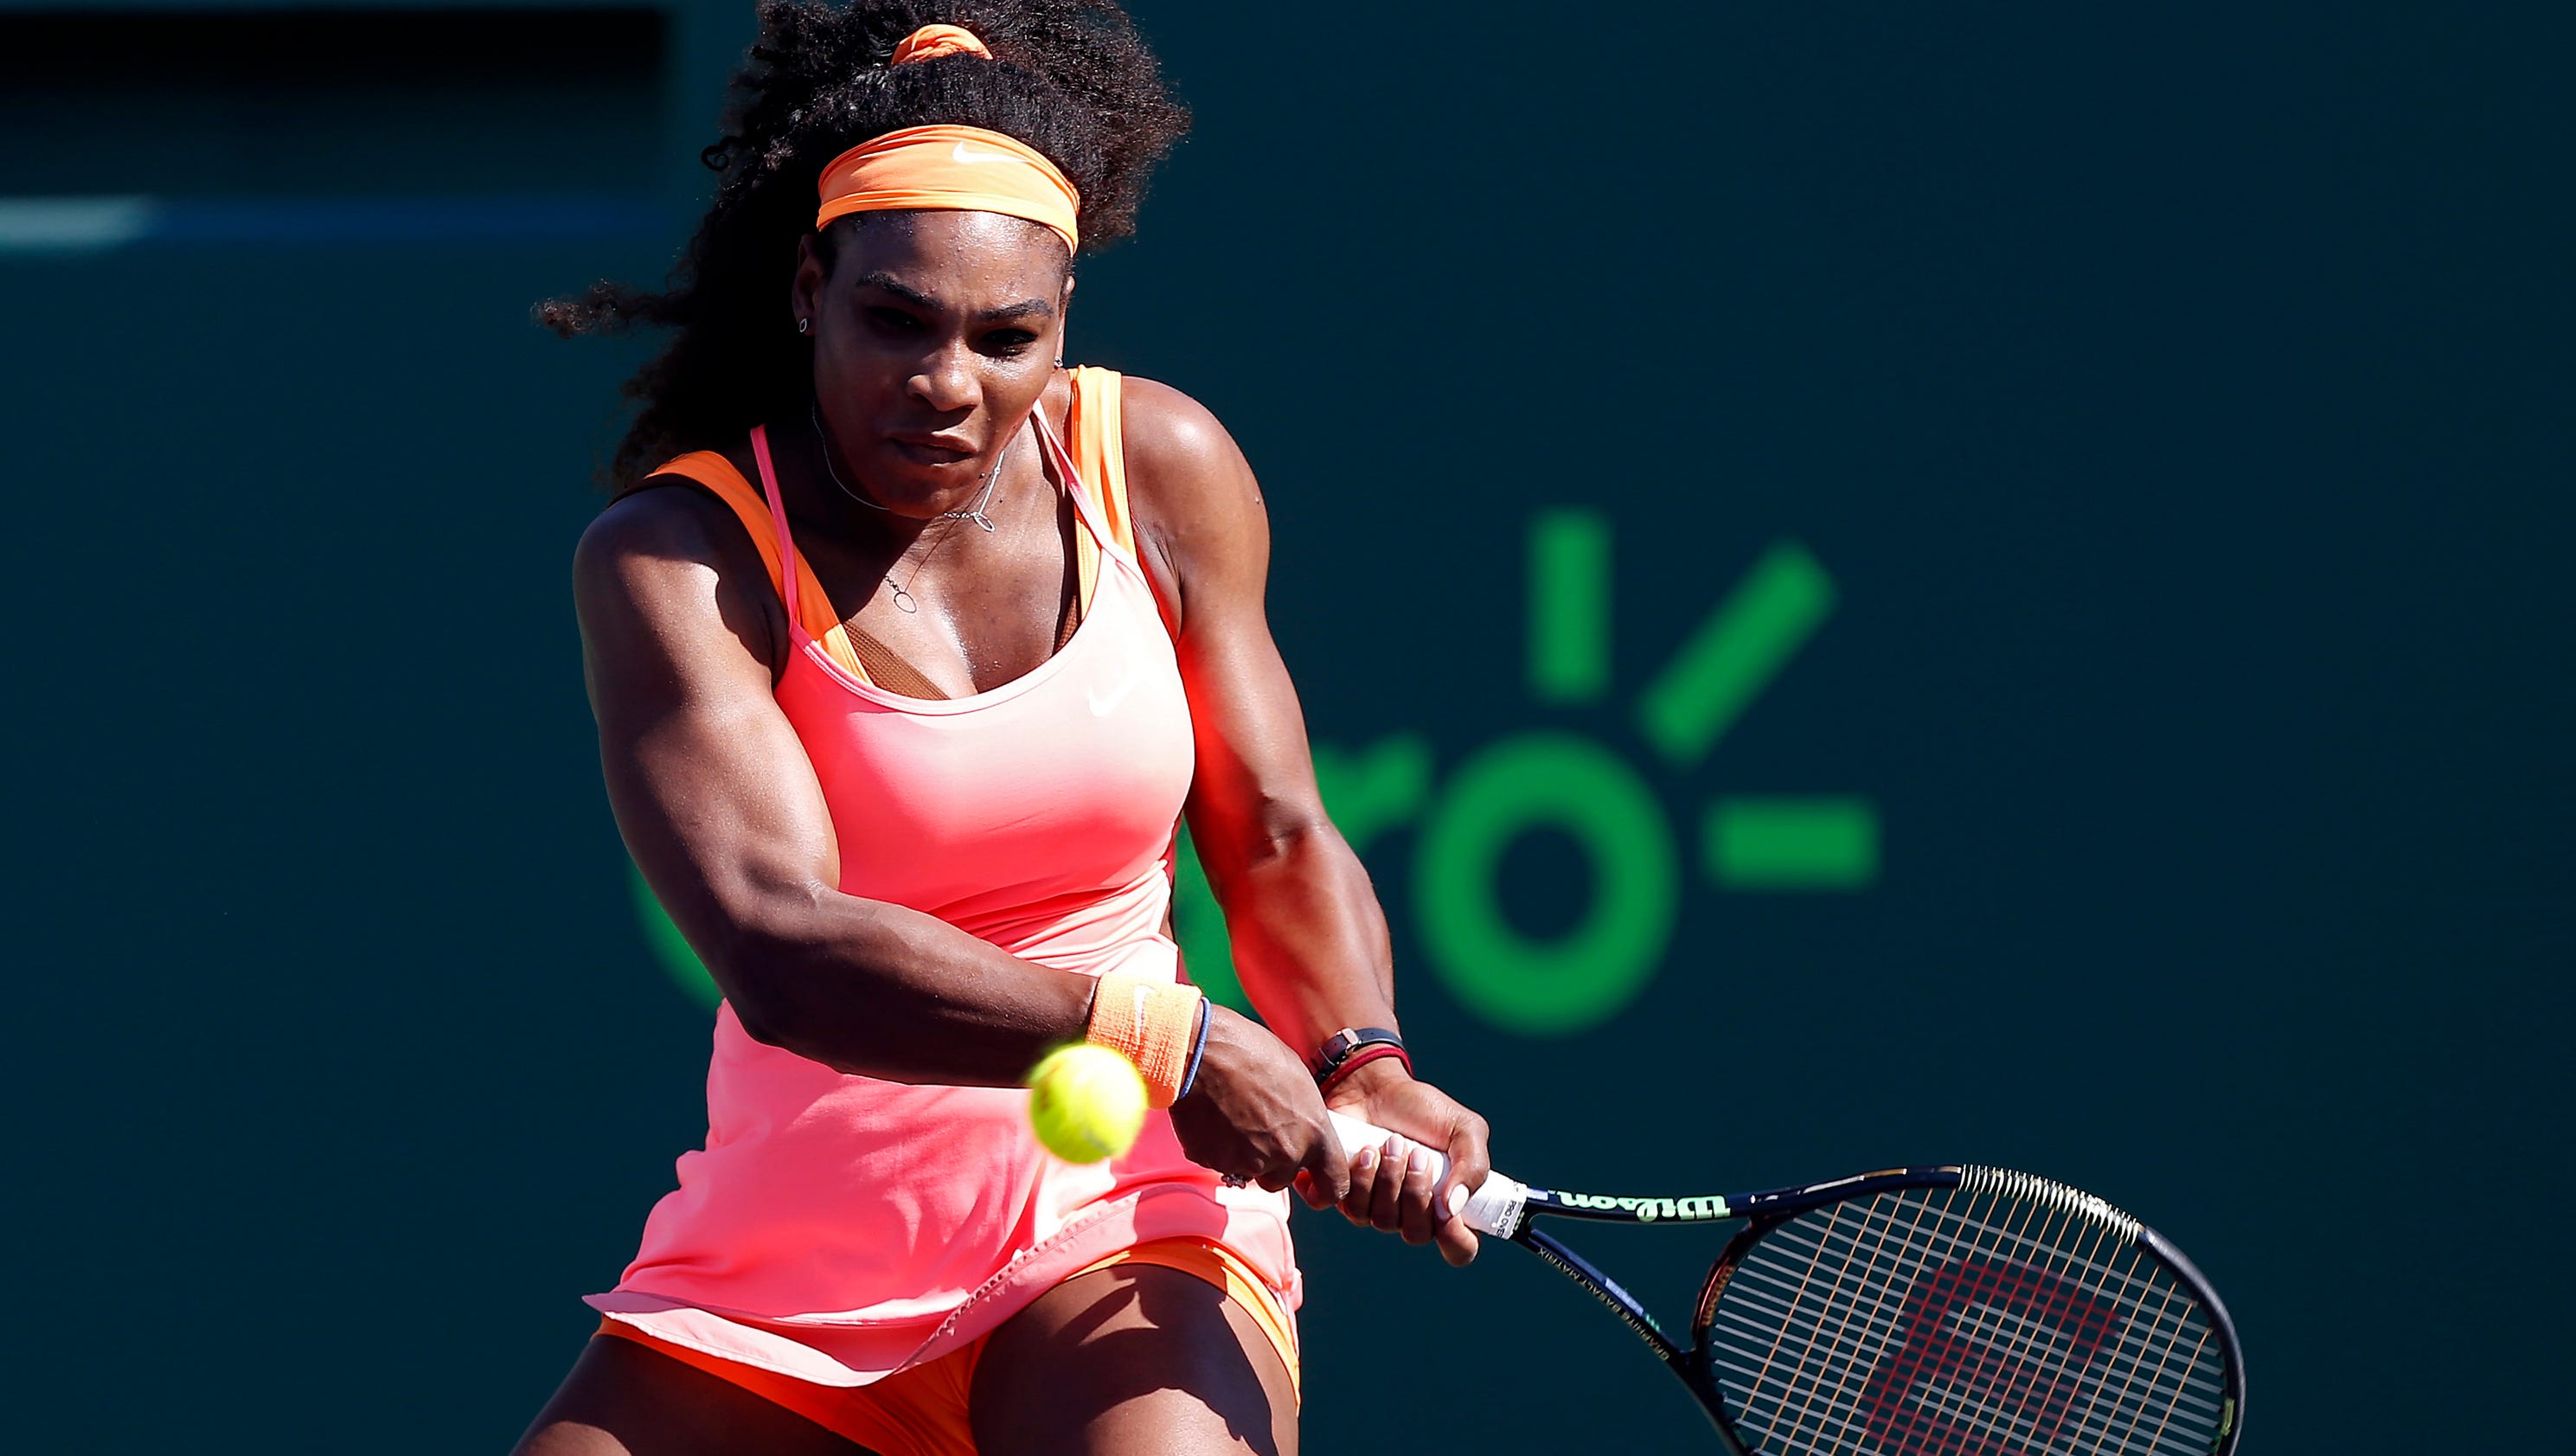 Serena William rolls by 15-year-old CiCi Bellis in 41 minutes at Miami3200 x 1680